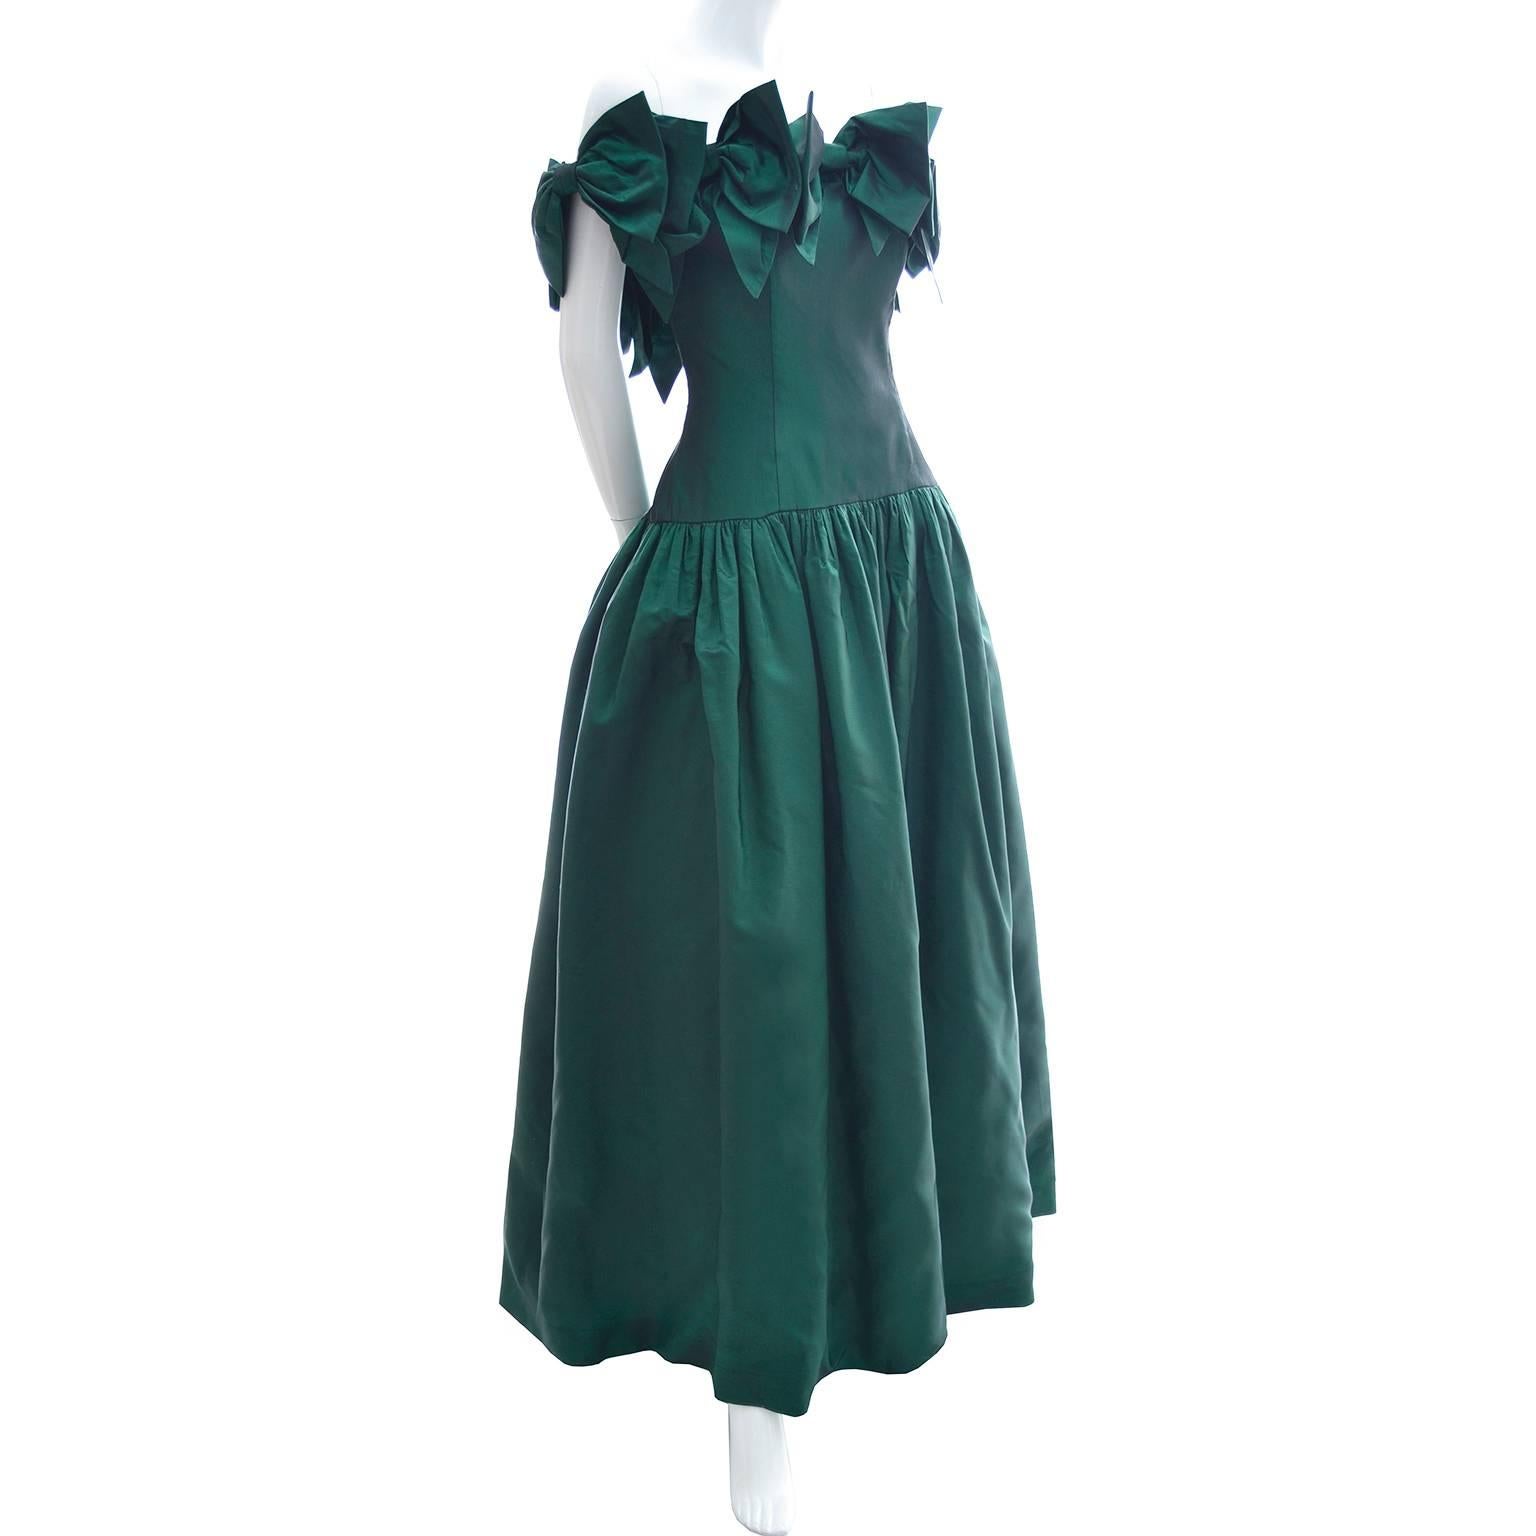 This stunning iridescent green vintage dress was designed by Victor Costa and was purchased at Saks Fifth Avenue in the 1980's. The dress has a back zipper and the semi off shoulder neckline is covered with bows. There is a built in tulle slip and